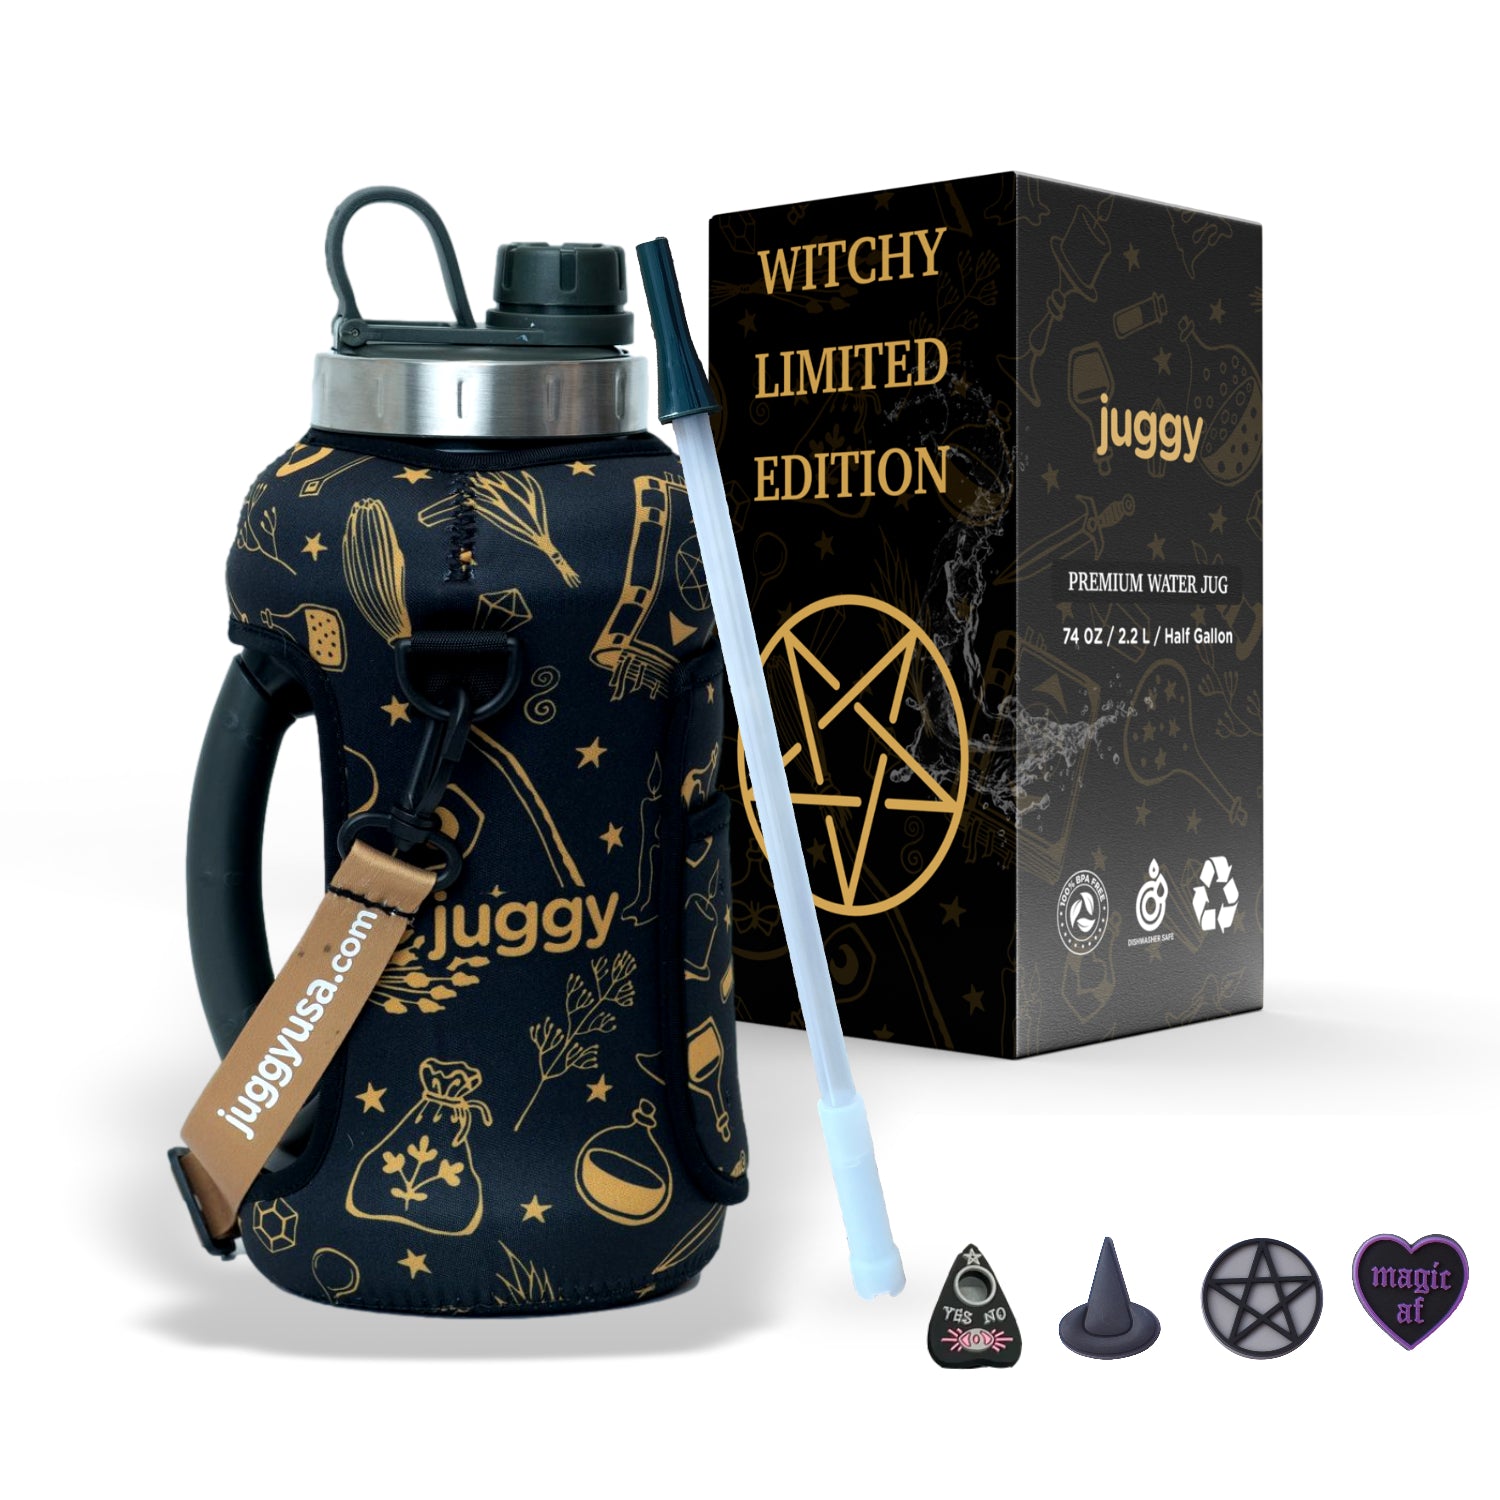 Witchy Special Edition Bundle – JUGGY